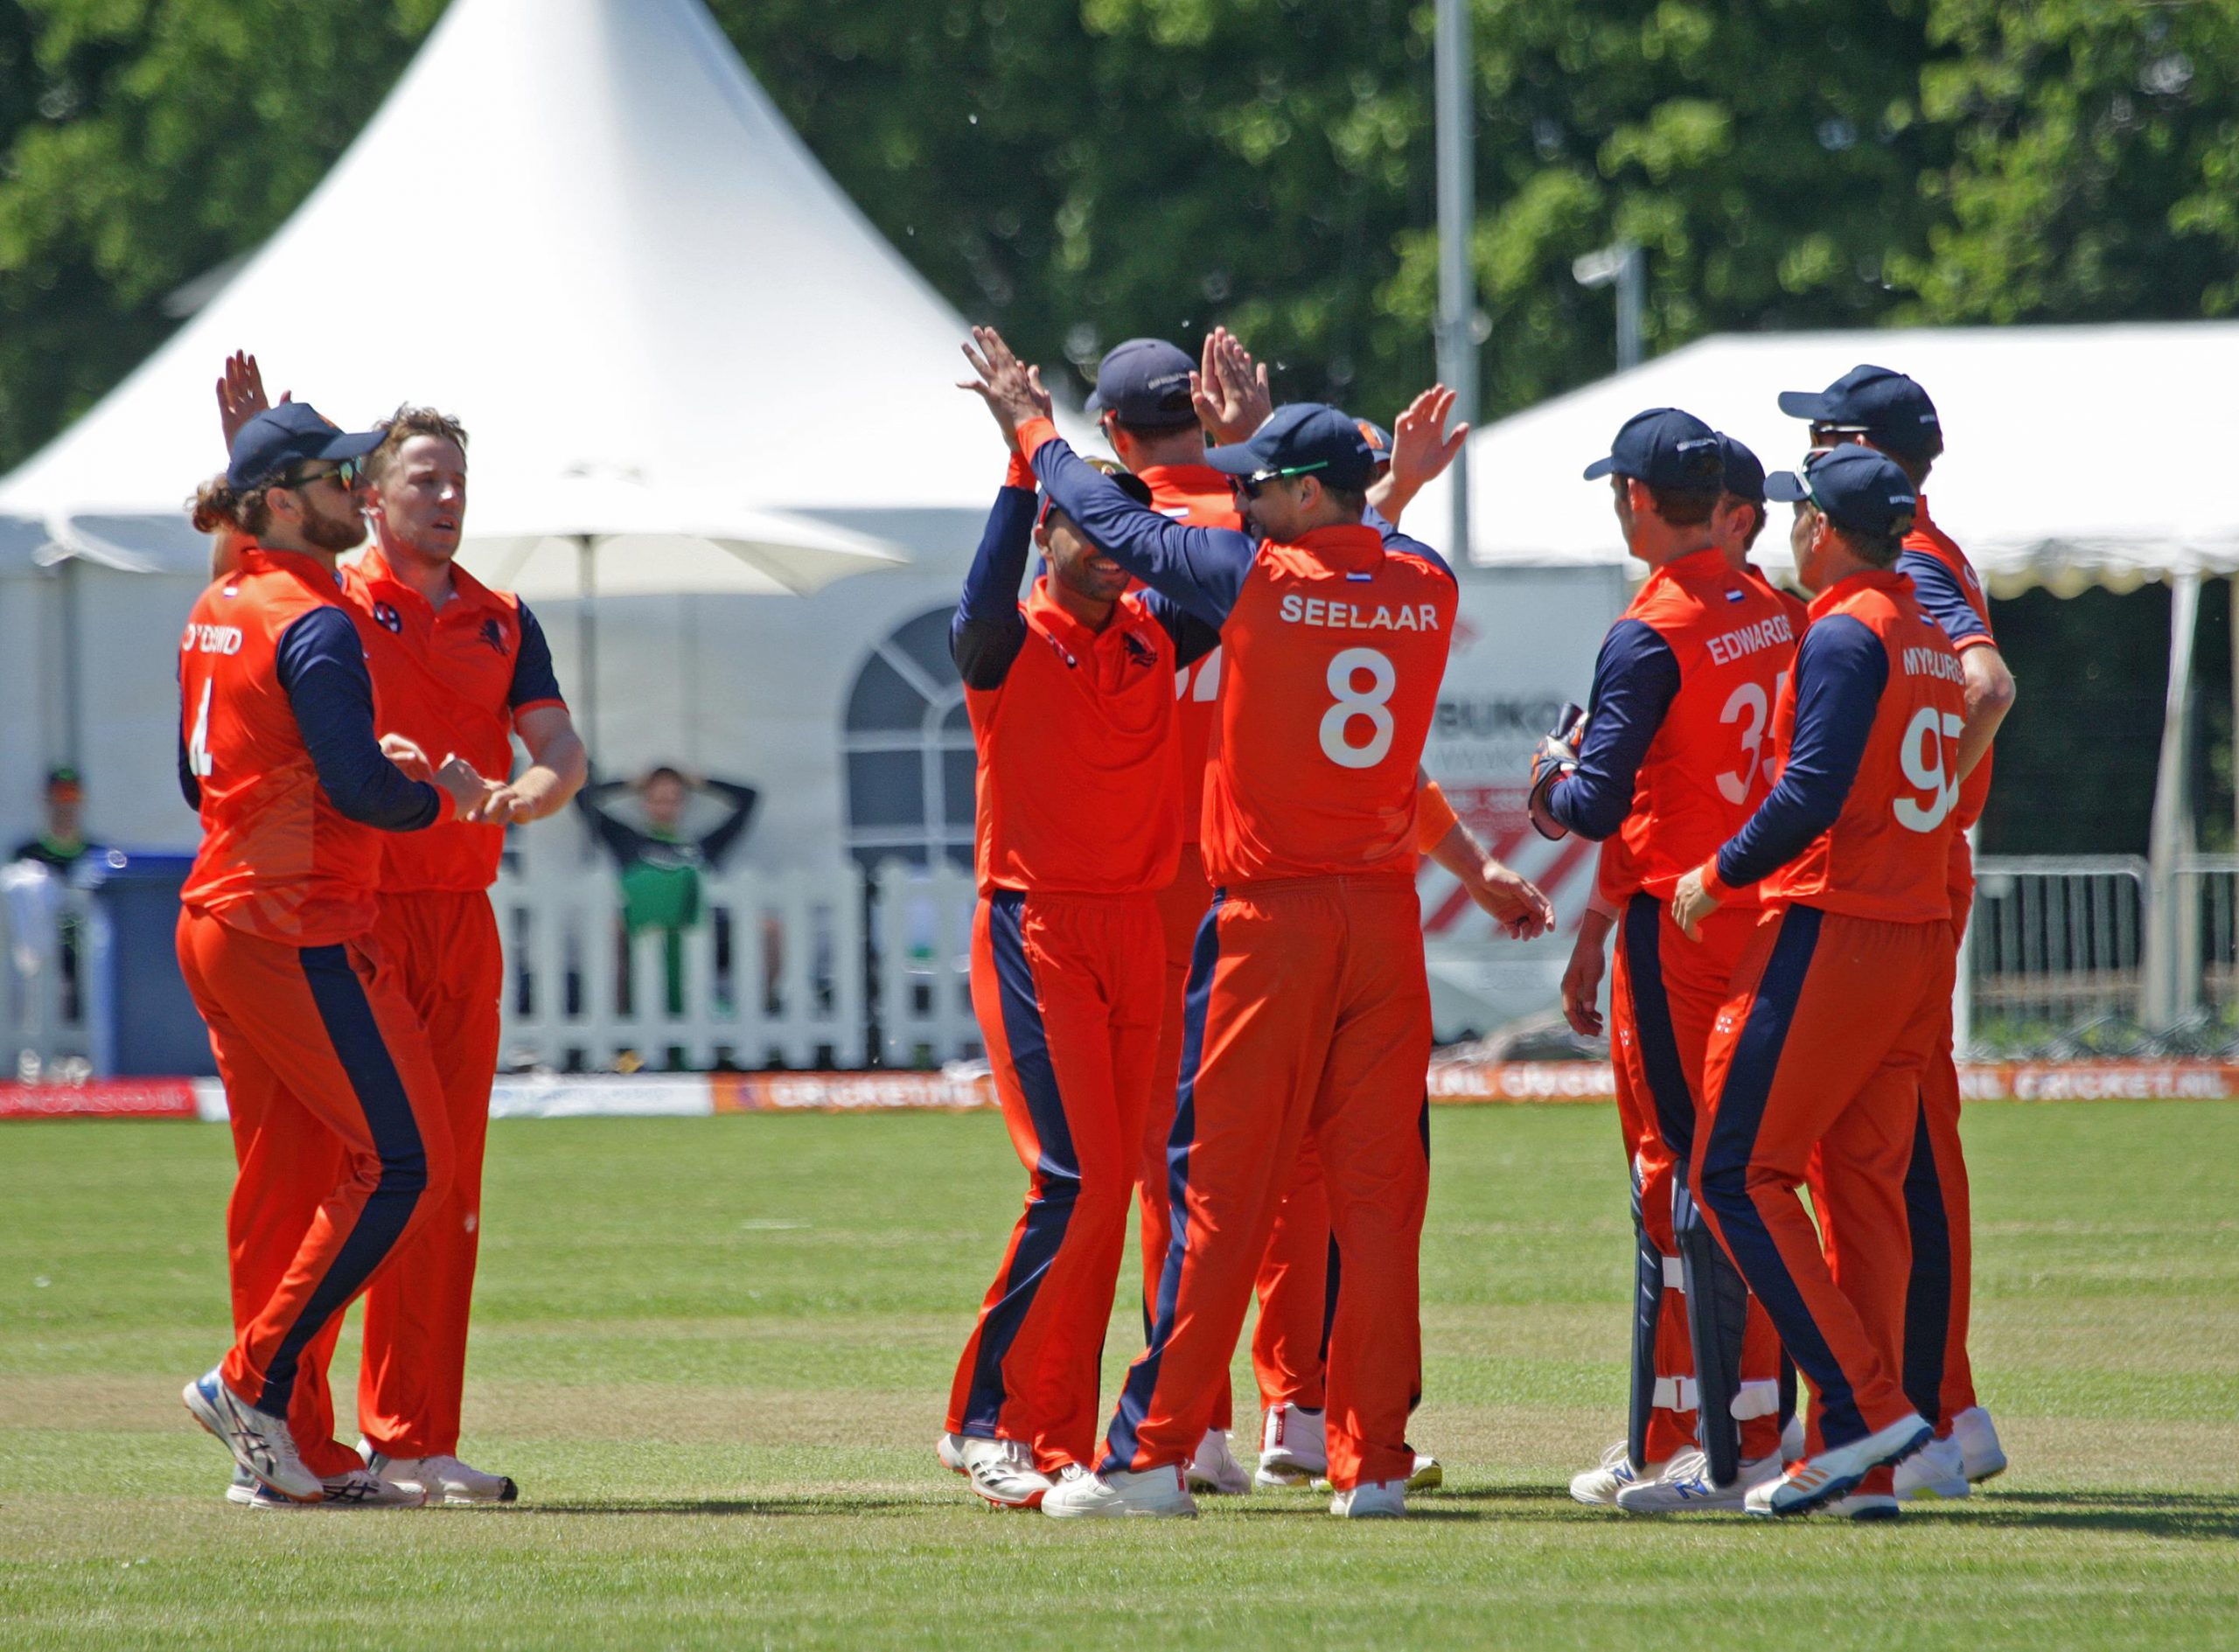 Miss you, Super League: A fan’s view of The Netherlands’ brief sit at the high table – Emerging Cricket